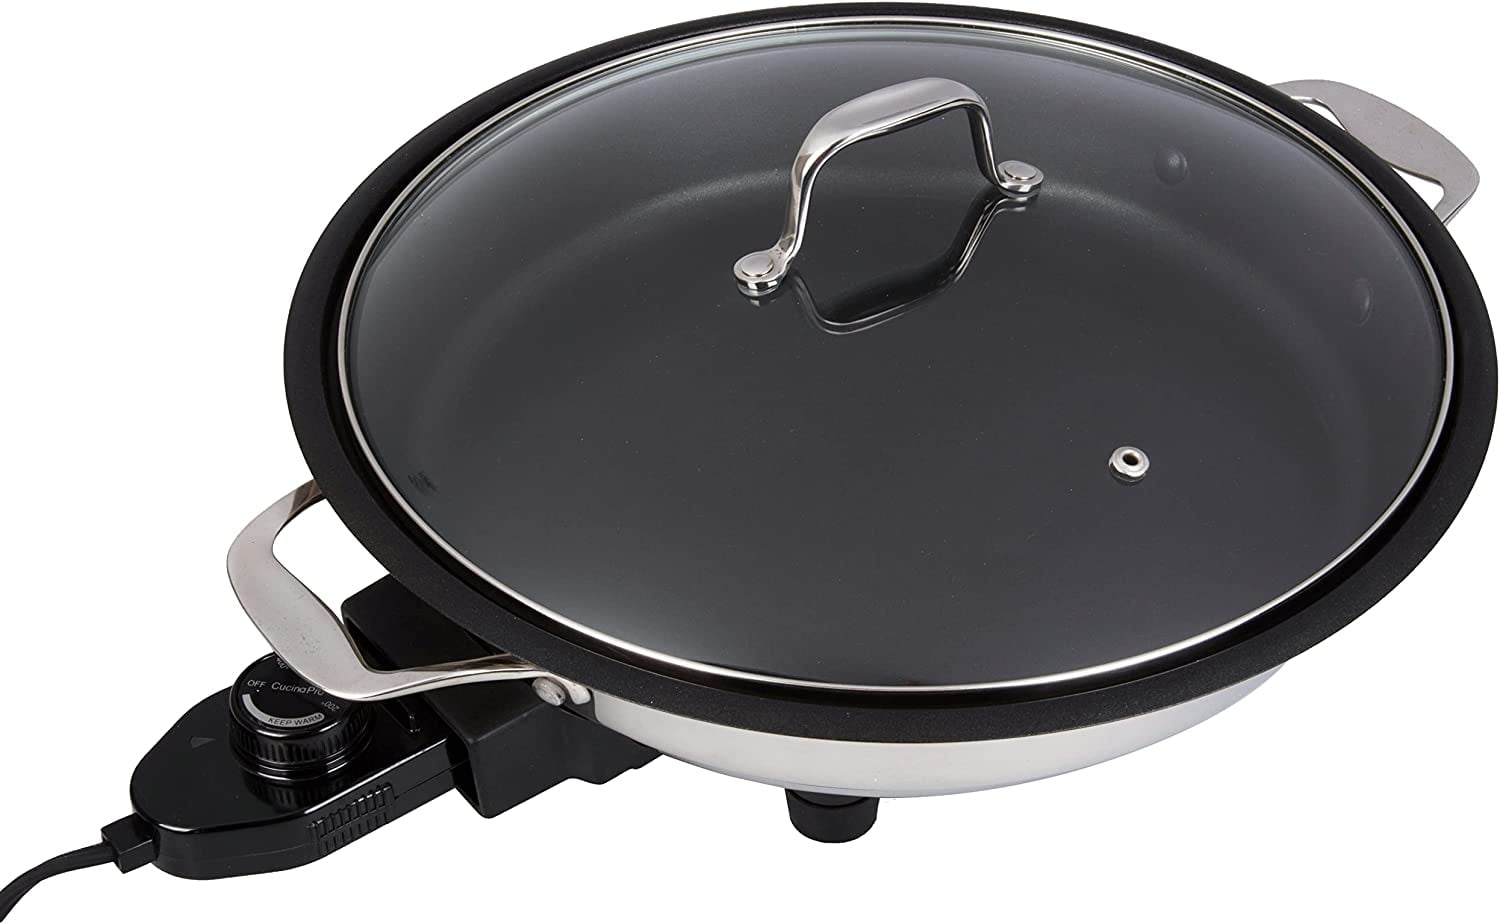 Electric Skillet Nonstick with Lids - 16 inch Extra Large Frying Pan,Ceramic, Adjustable Temperature, Cool Touch Handles, NOZAYA